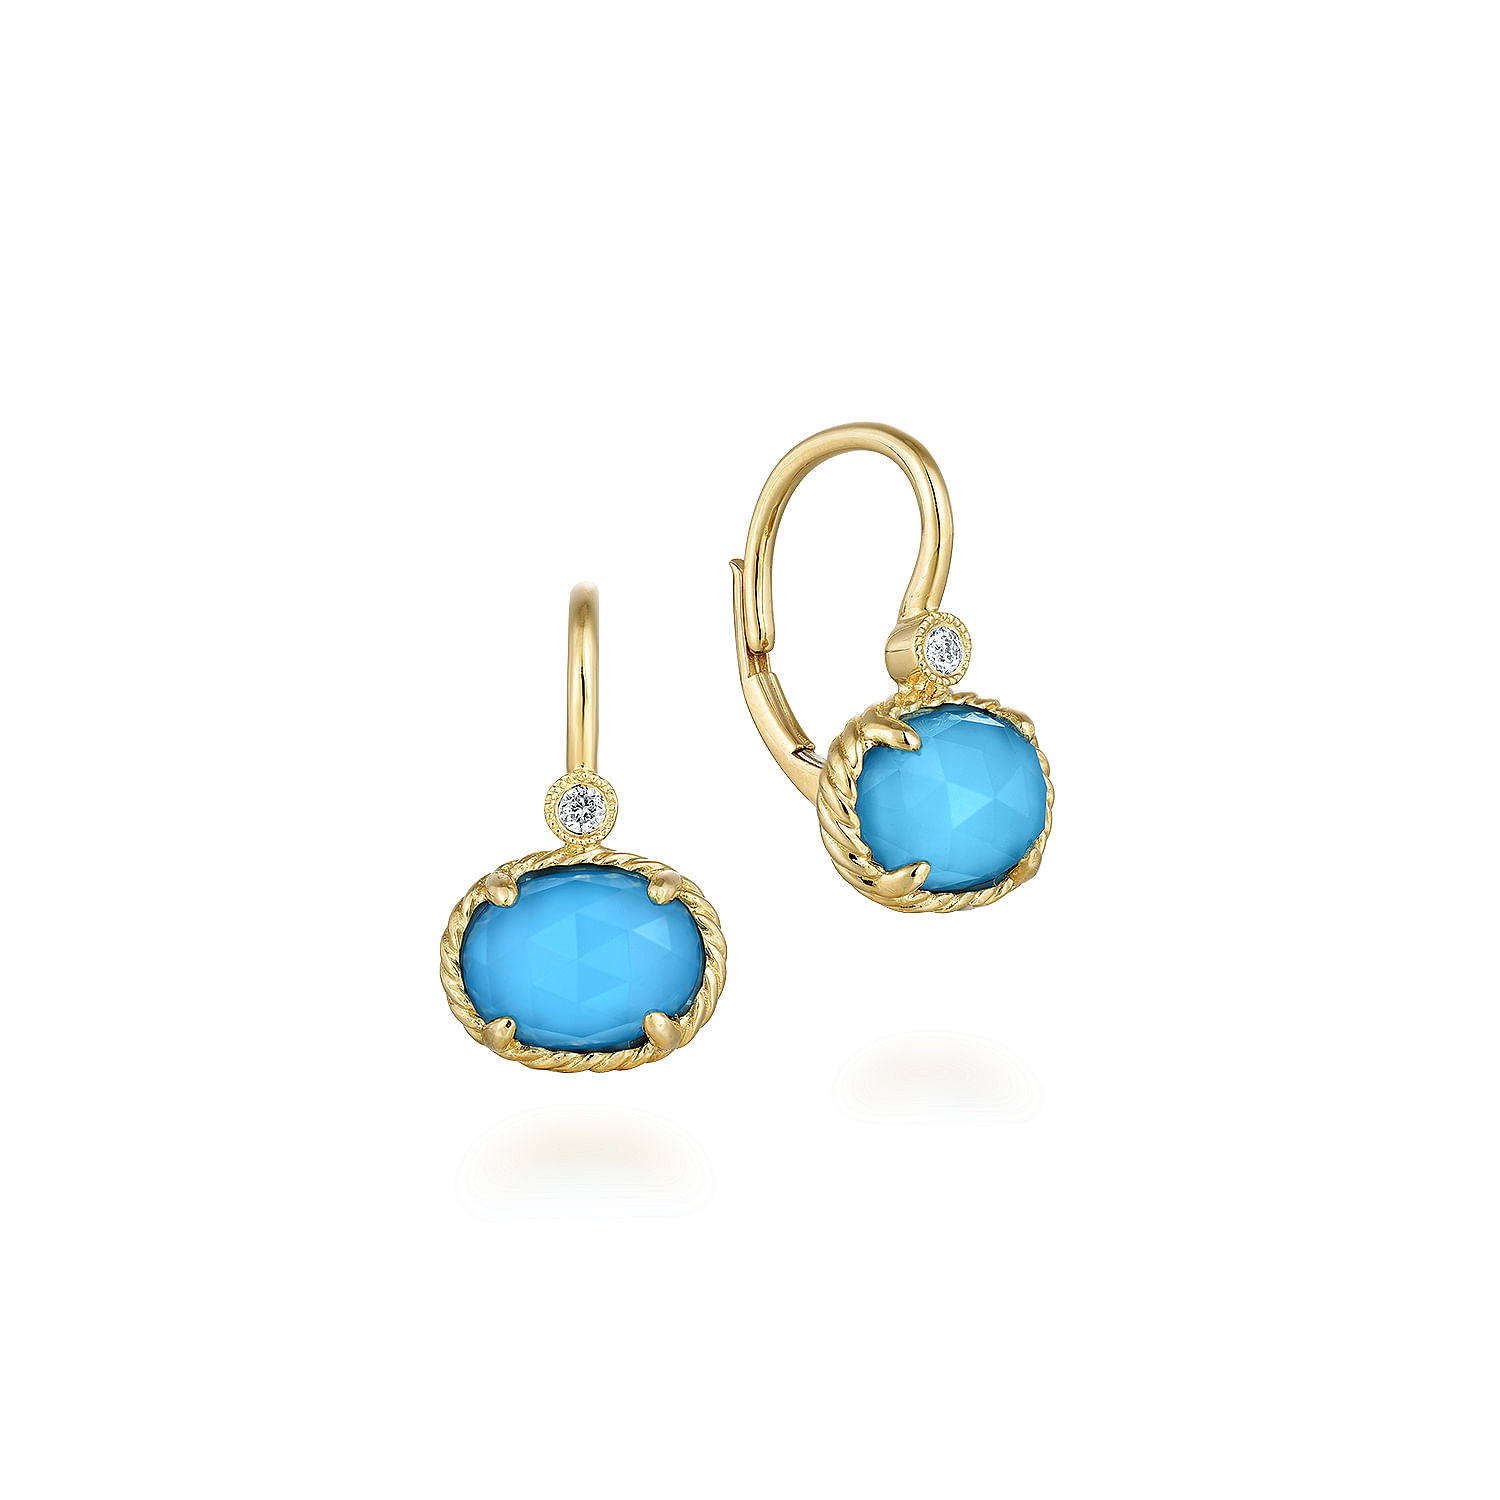 14K Yellow Gold Diamond Rock Crystal and Turquoise Oval Drop Earrings